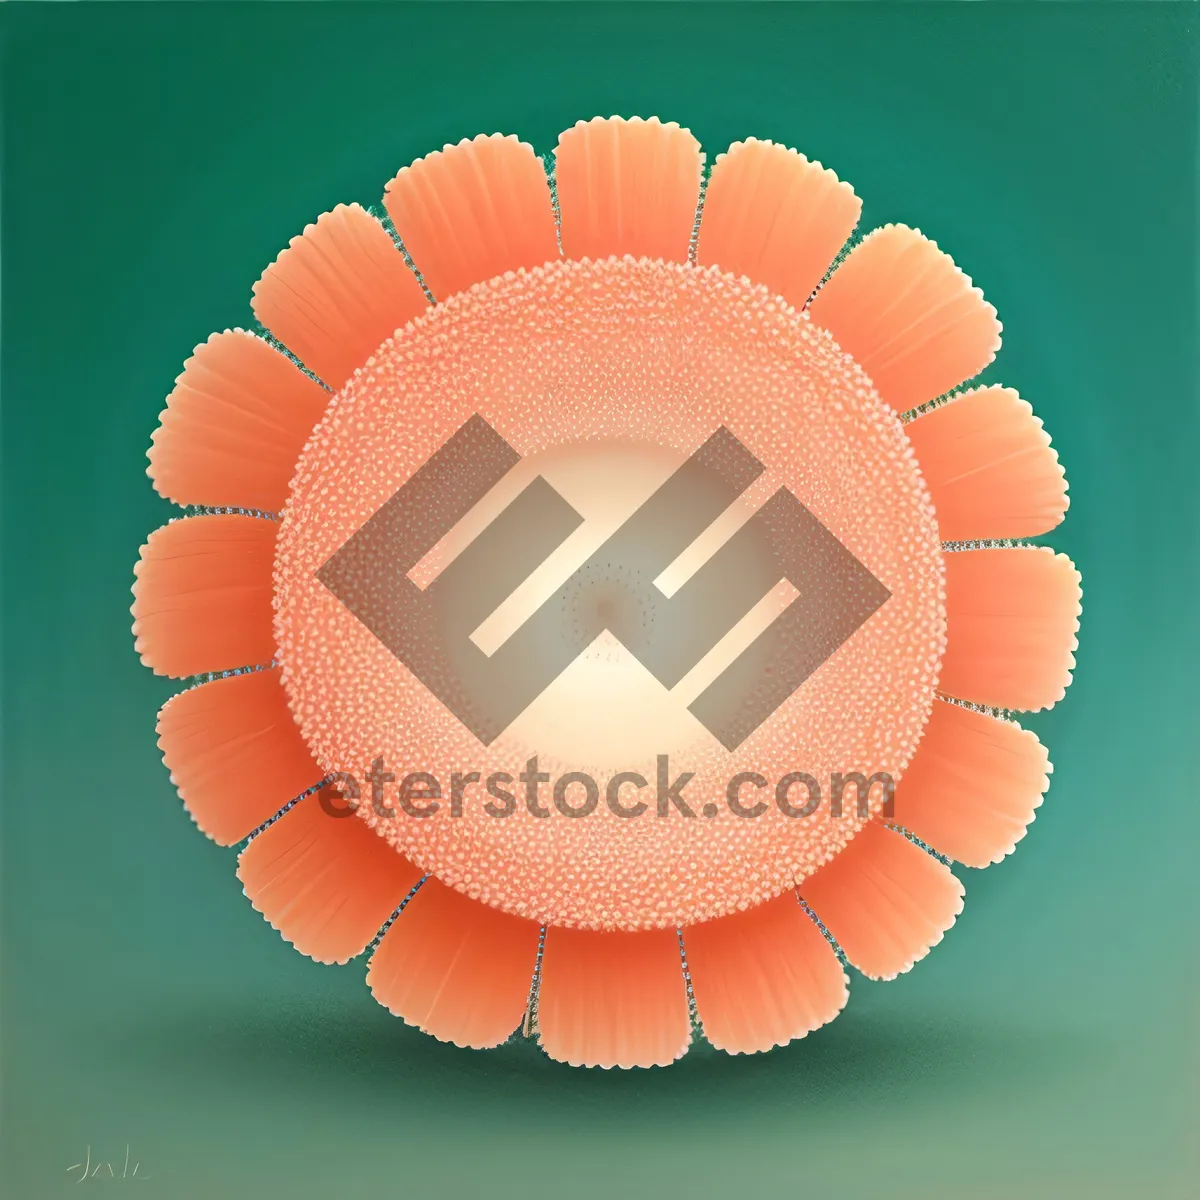 Picture of Dynamic Gear: A Symbolic Round Graphic in Artful Design